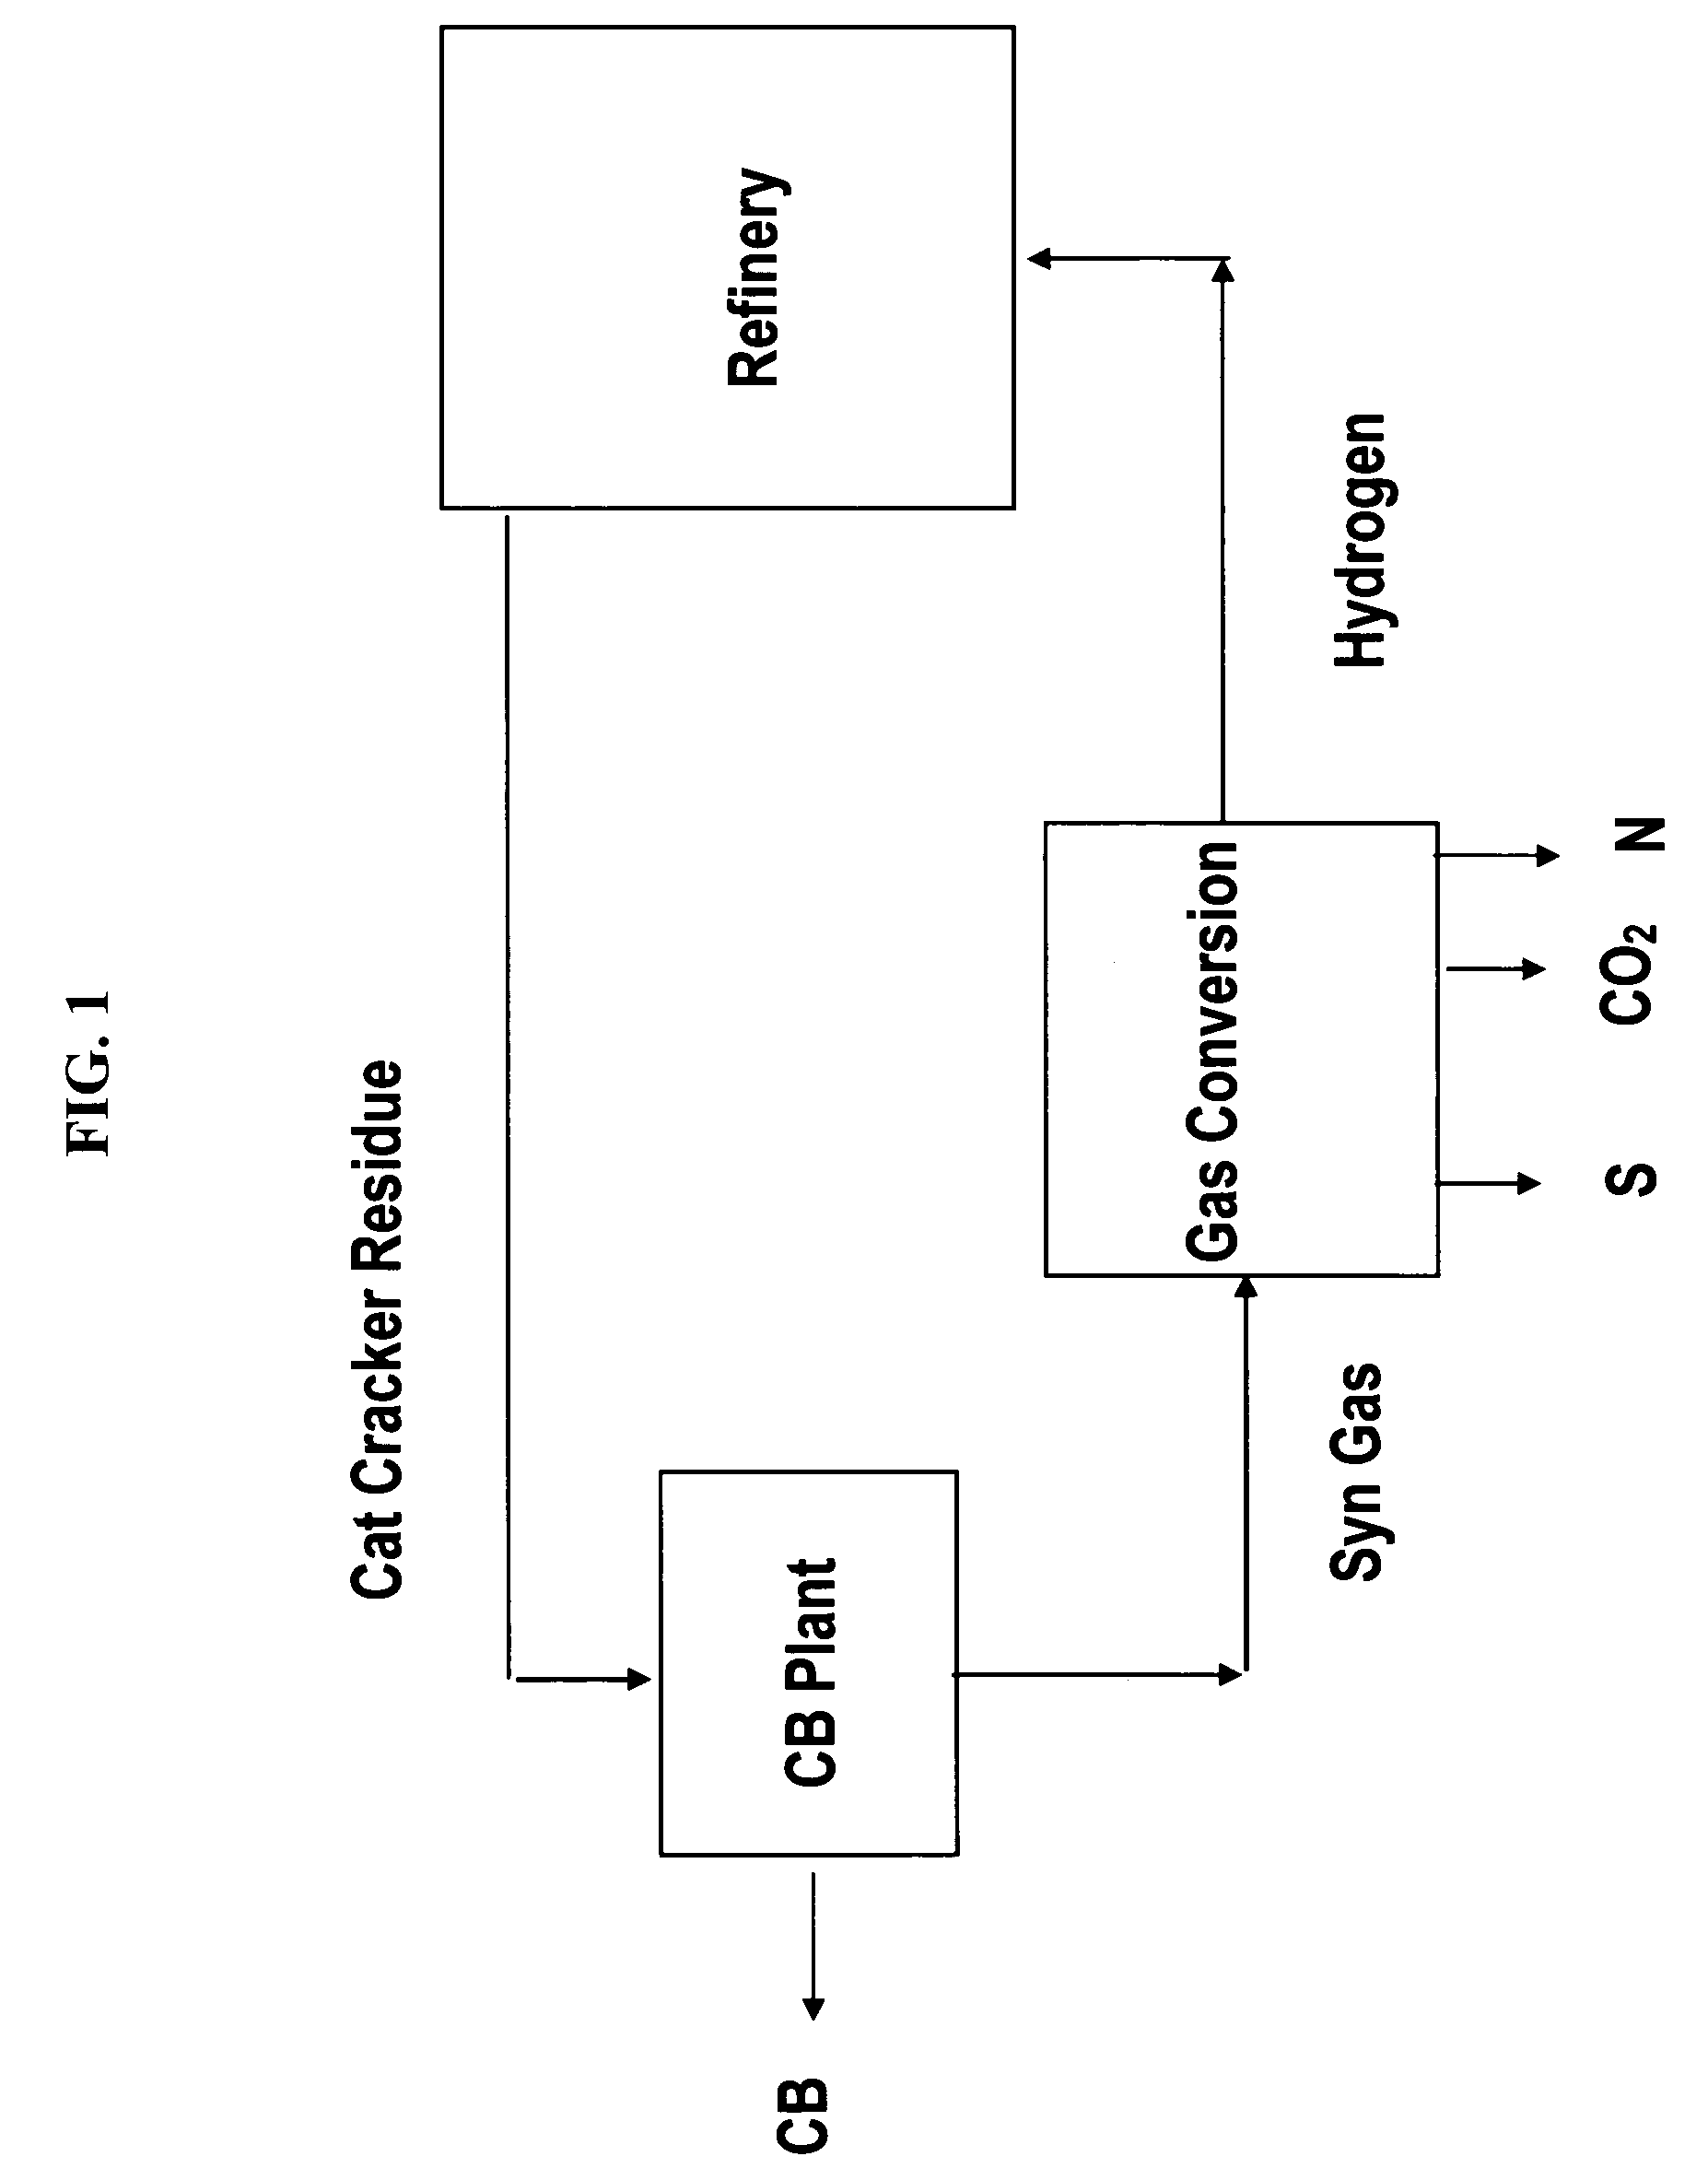 Method to produce hydrogen or synthesis gas